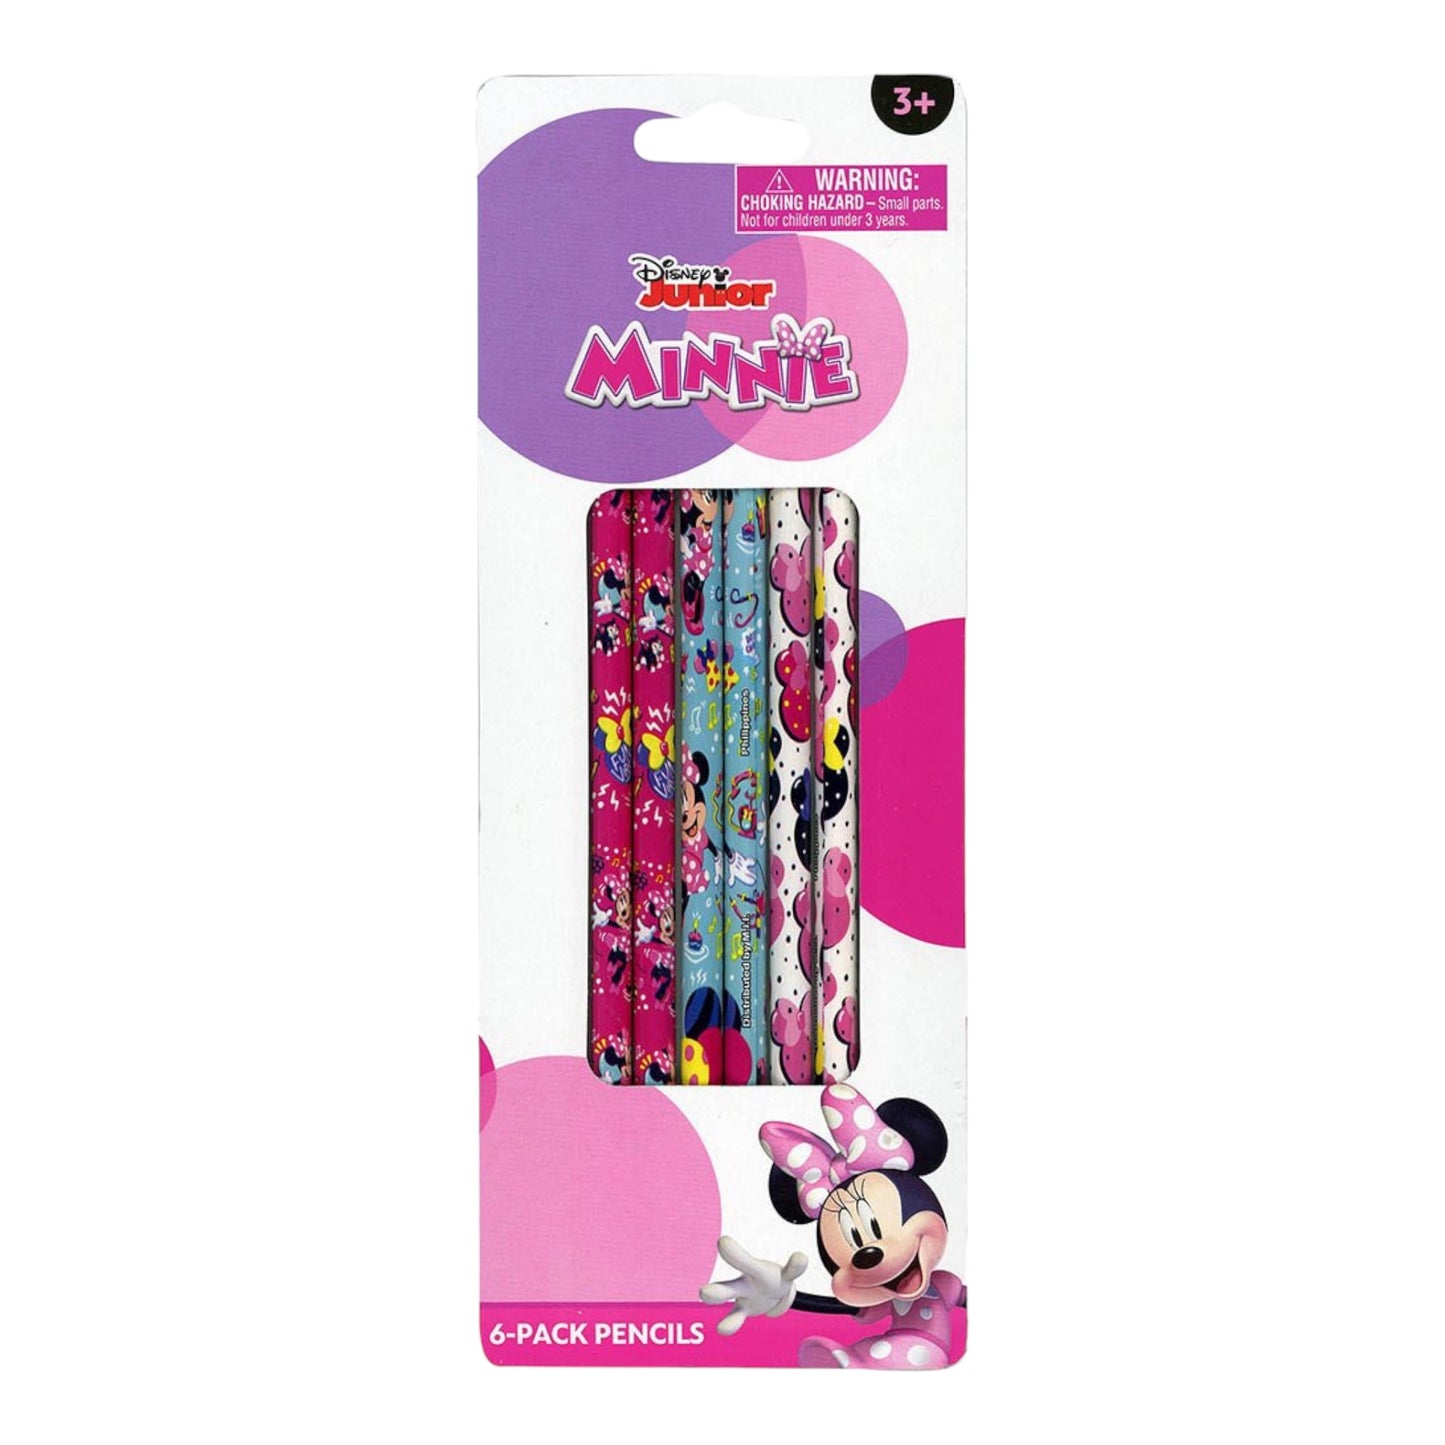 DISNEY JUNIOR MINNIE MOUSE 6 PACK PENCILS UPDP15022S R115